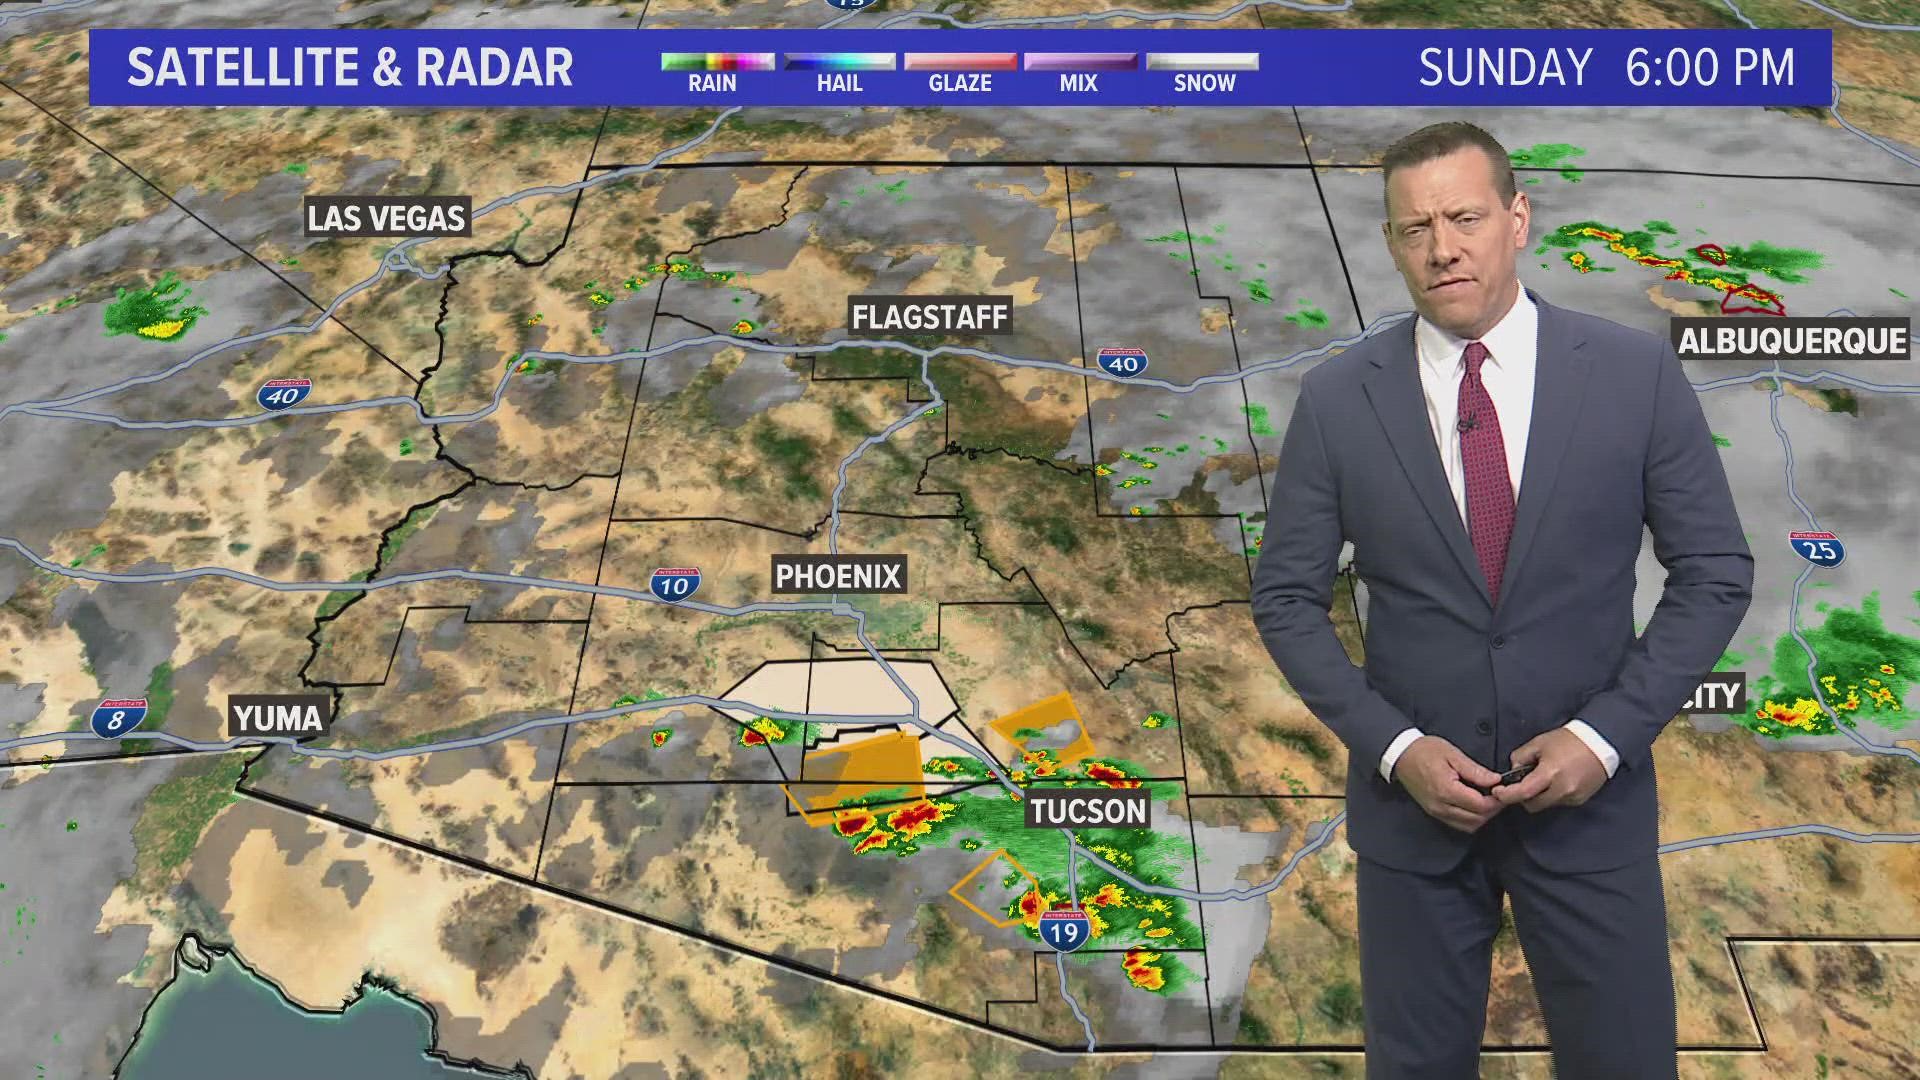 Monsoon storms will hit State 48 through Tuesday, followed by more heat, but lower humidity.